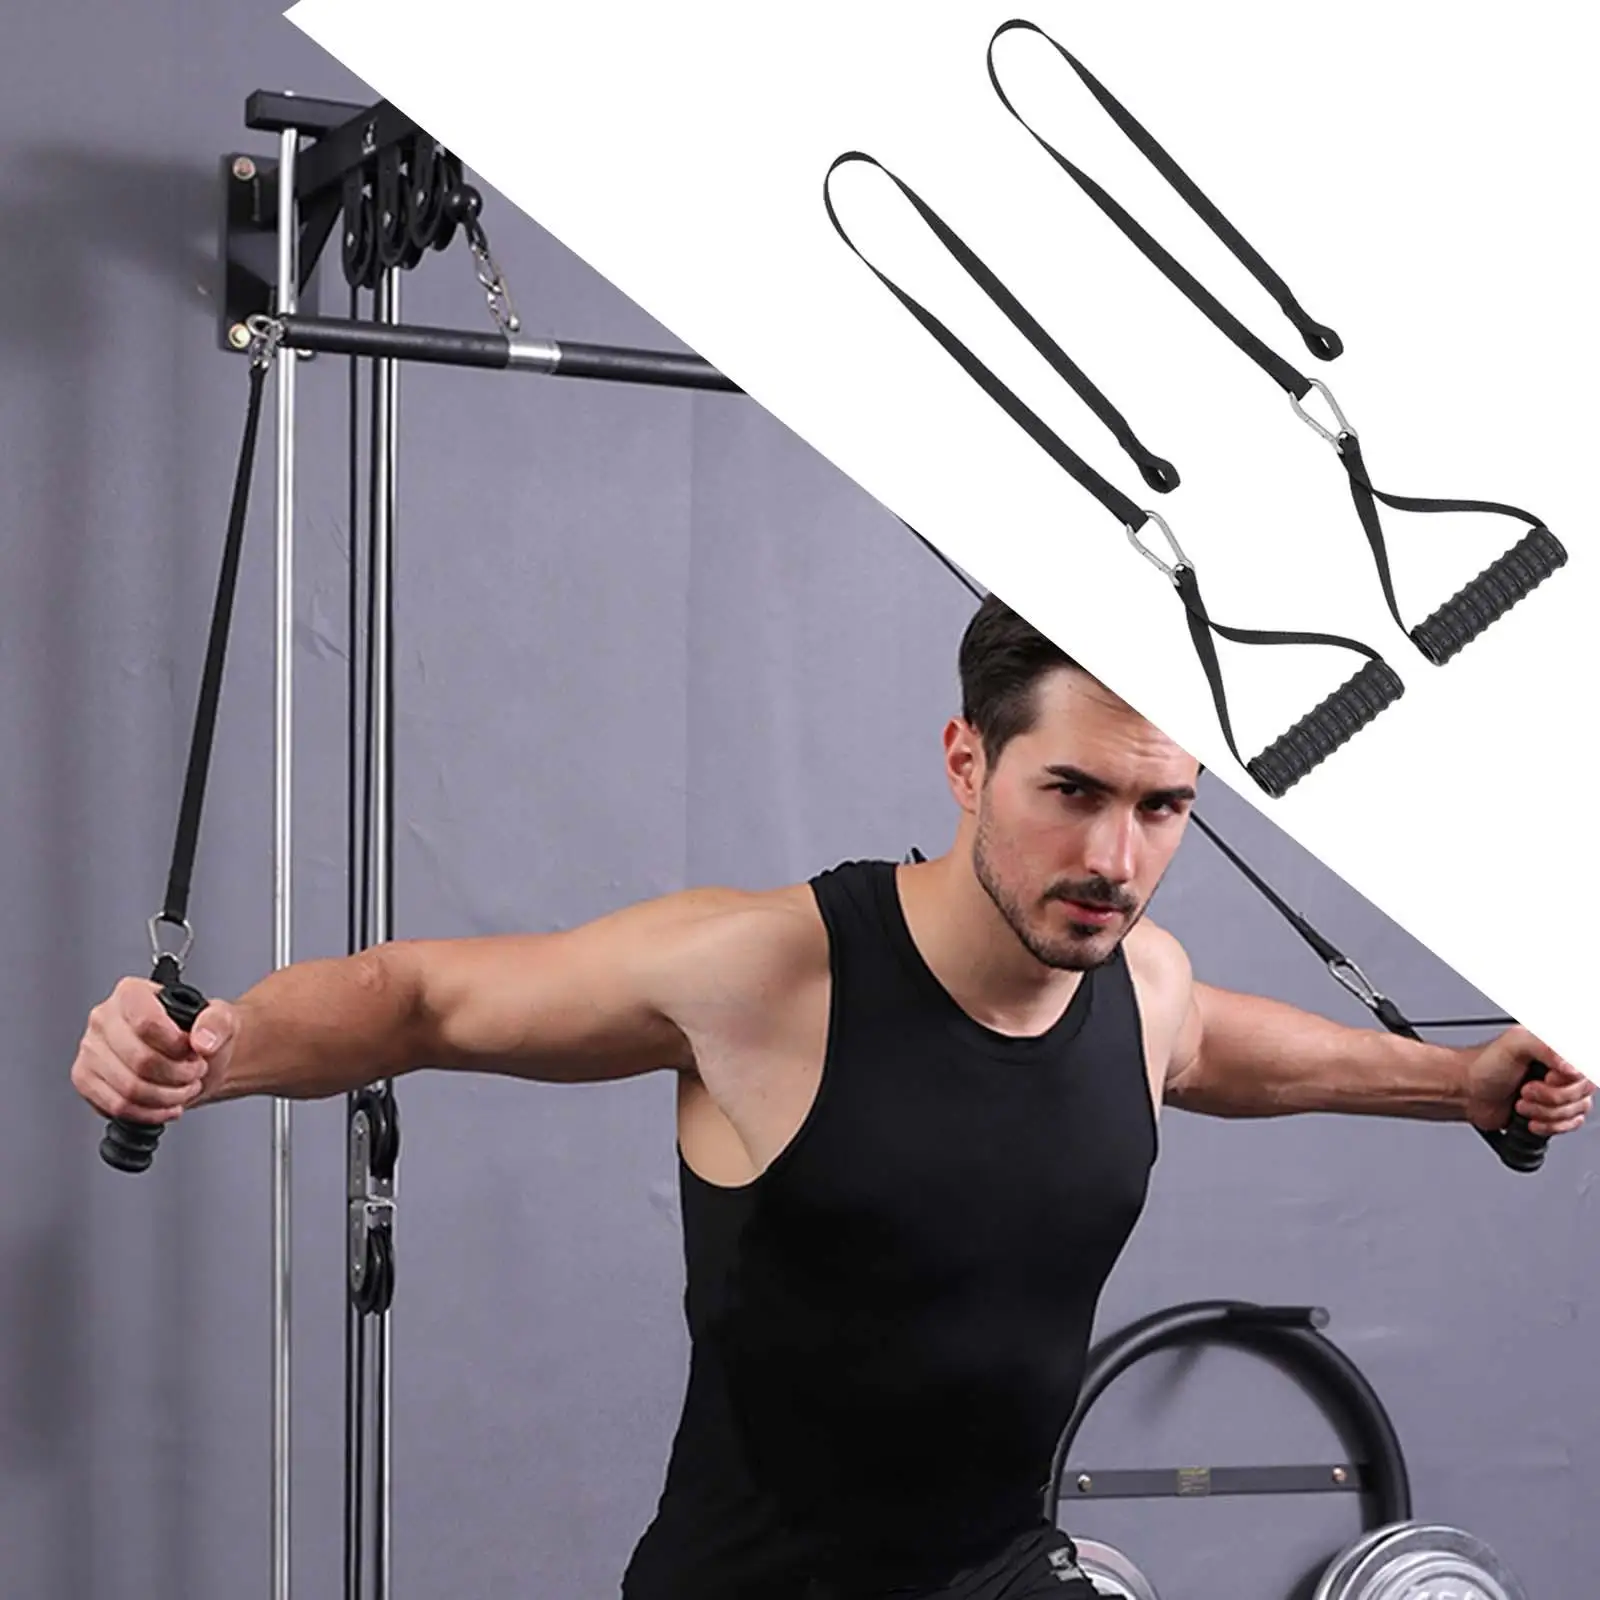 Ergonomic Triceps Rope Pull Down Handle for Push Downs for Strength Training